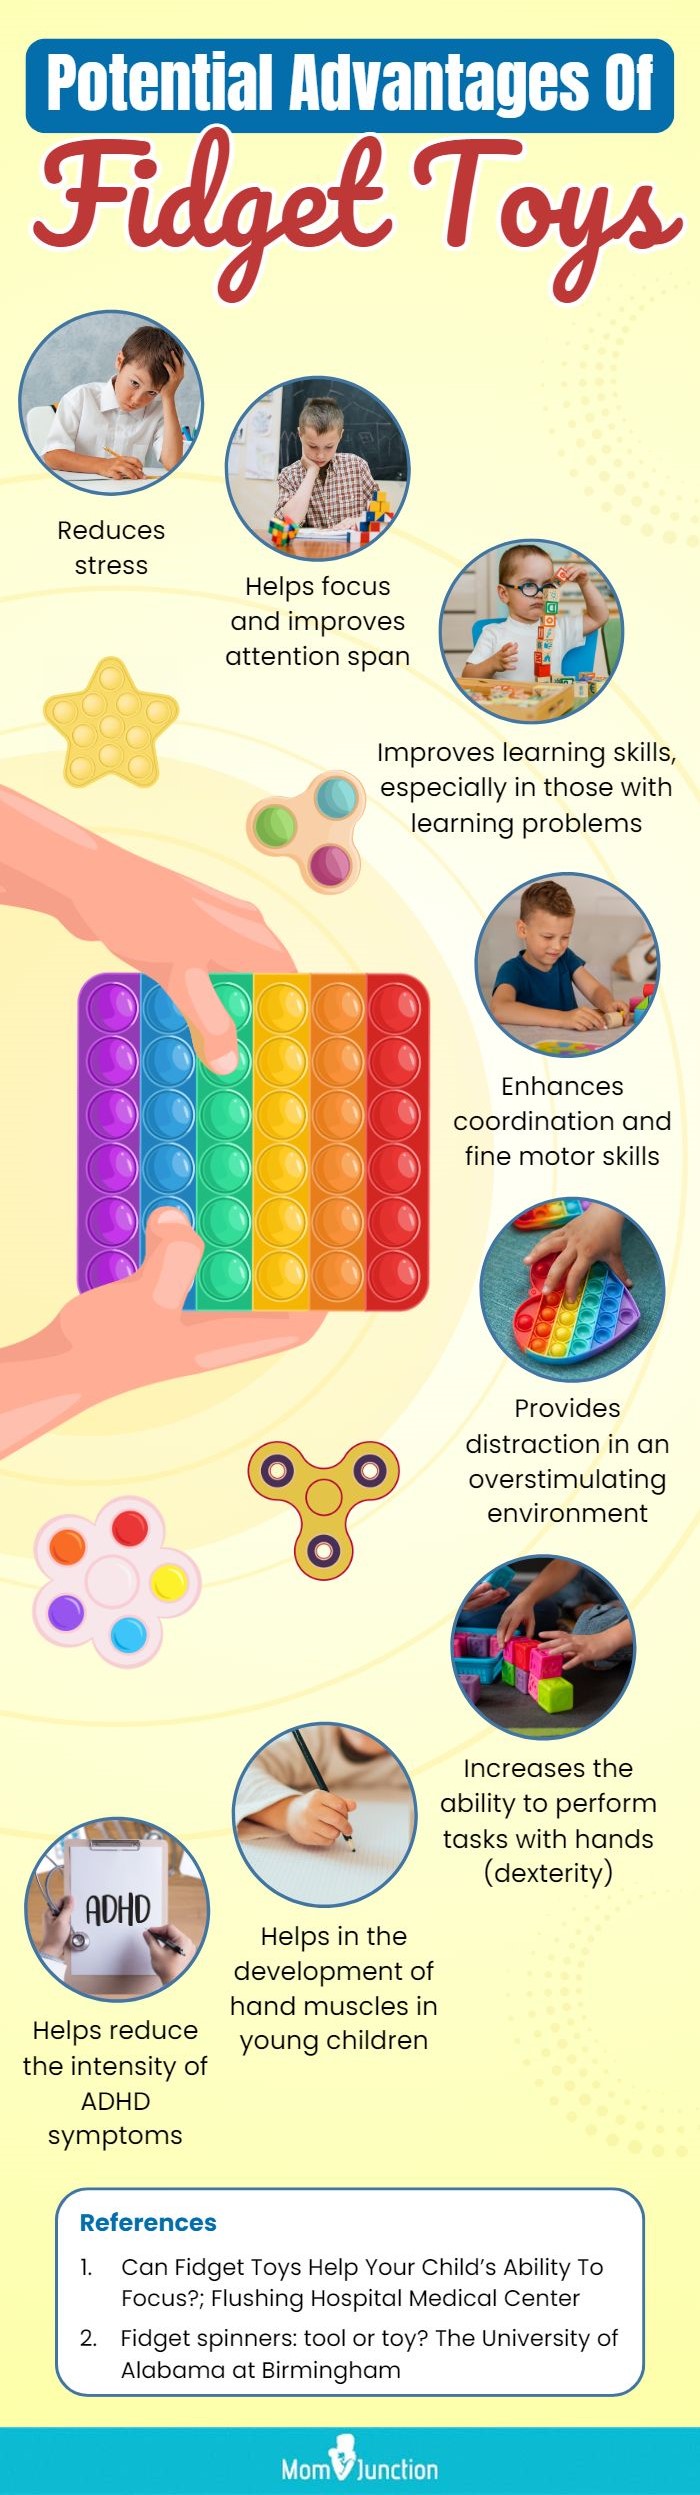 Can Fidget Toys Help Your Child's Ability To Focus? - Health Beat